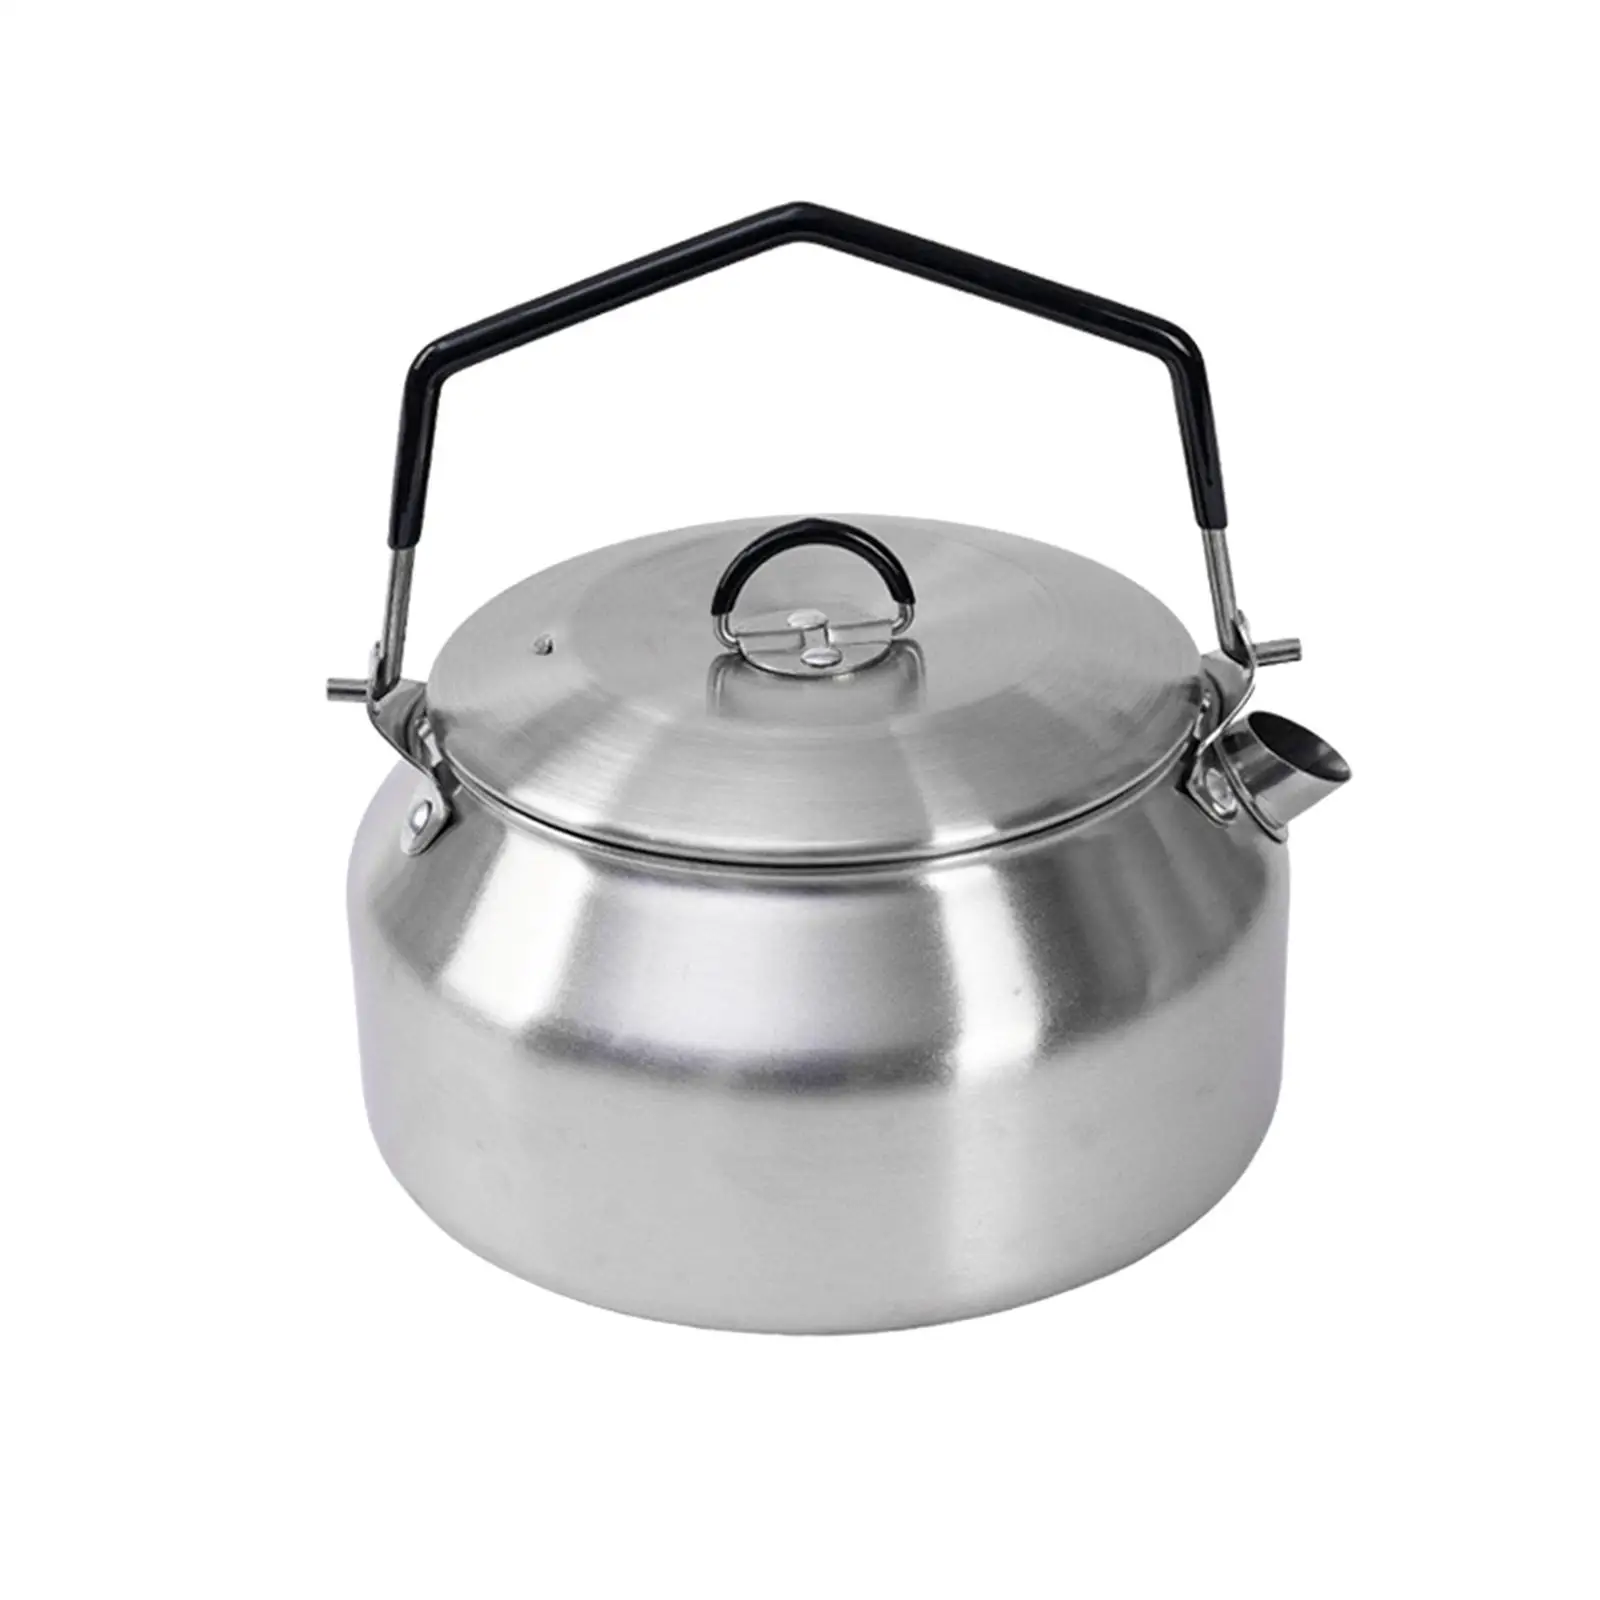 1L Camping Water Kettle Tea Pot Teapot Coffee Pot Anti Scald and Lockable Handle Boiling Water Teakettle for Barbecue Outdoor